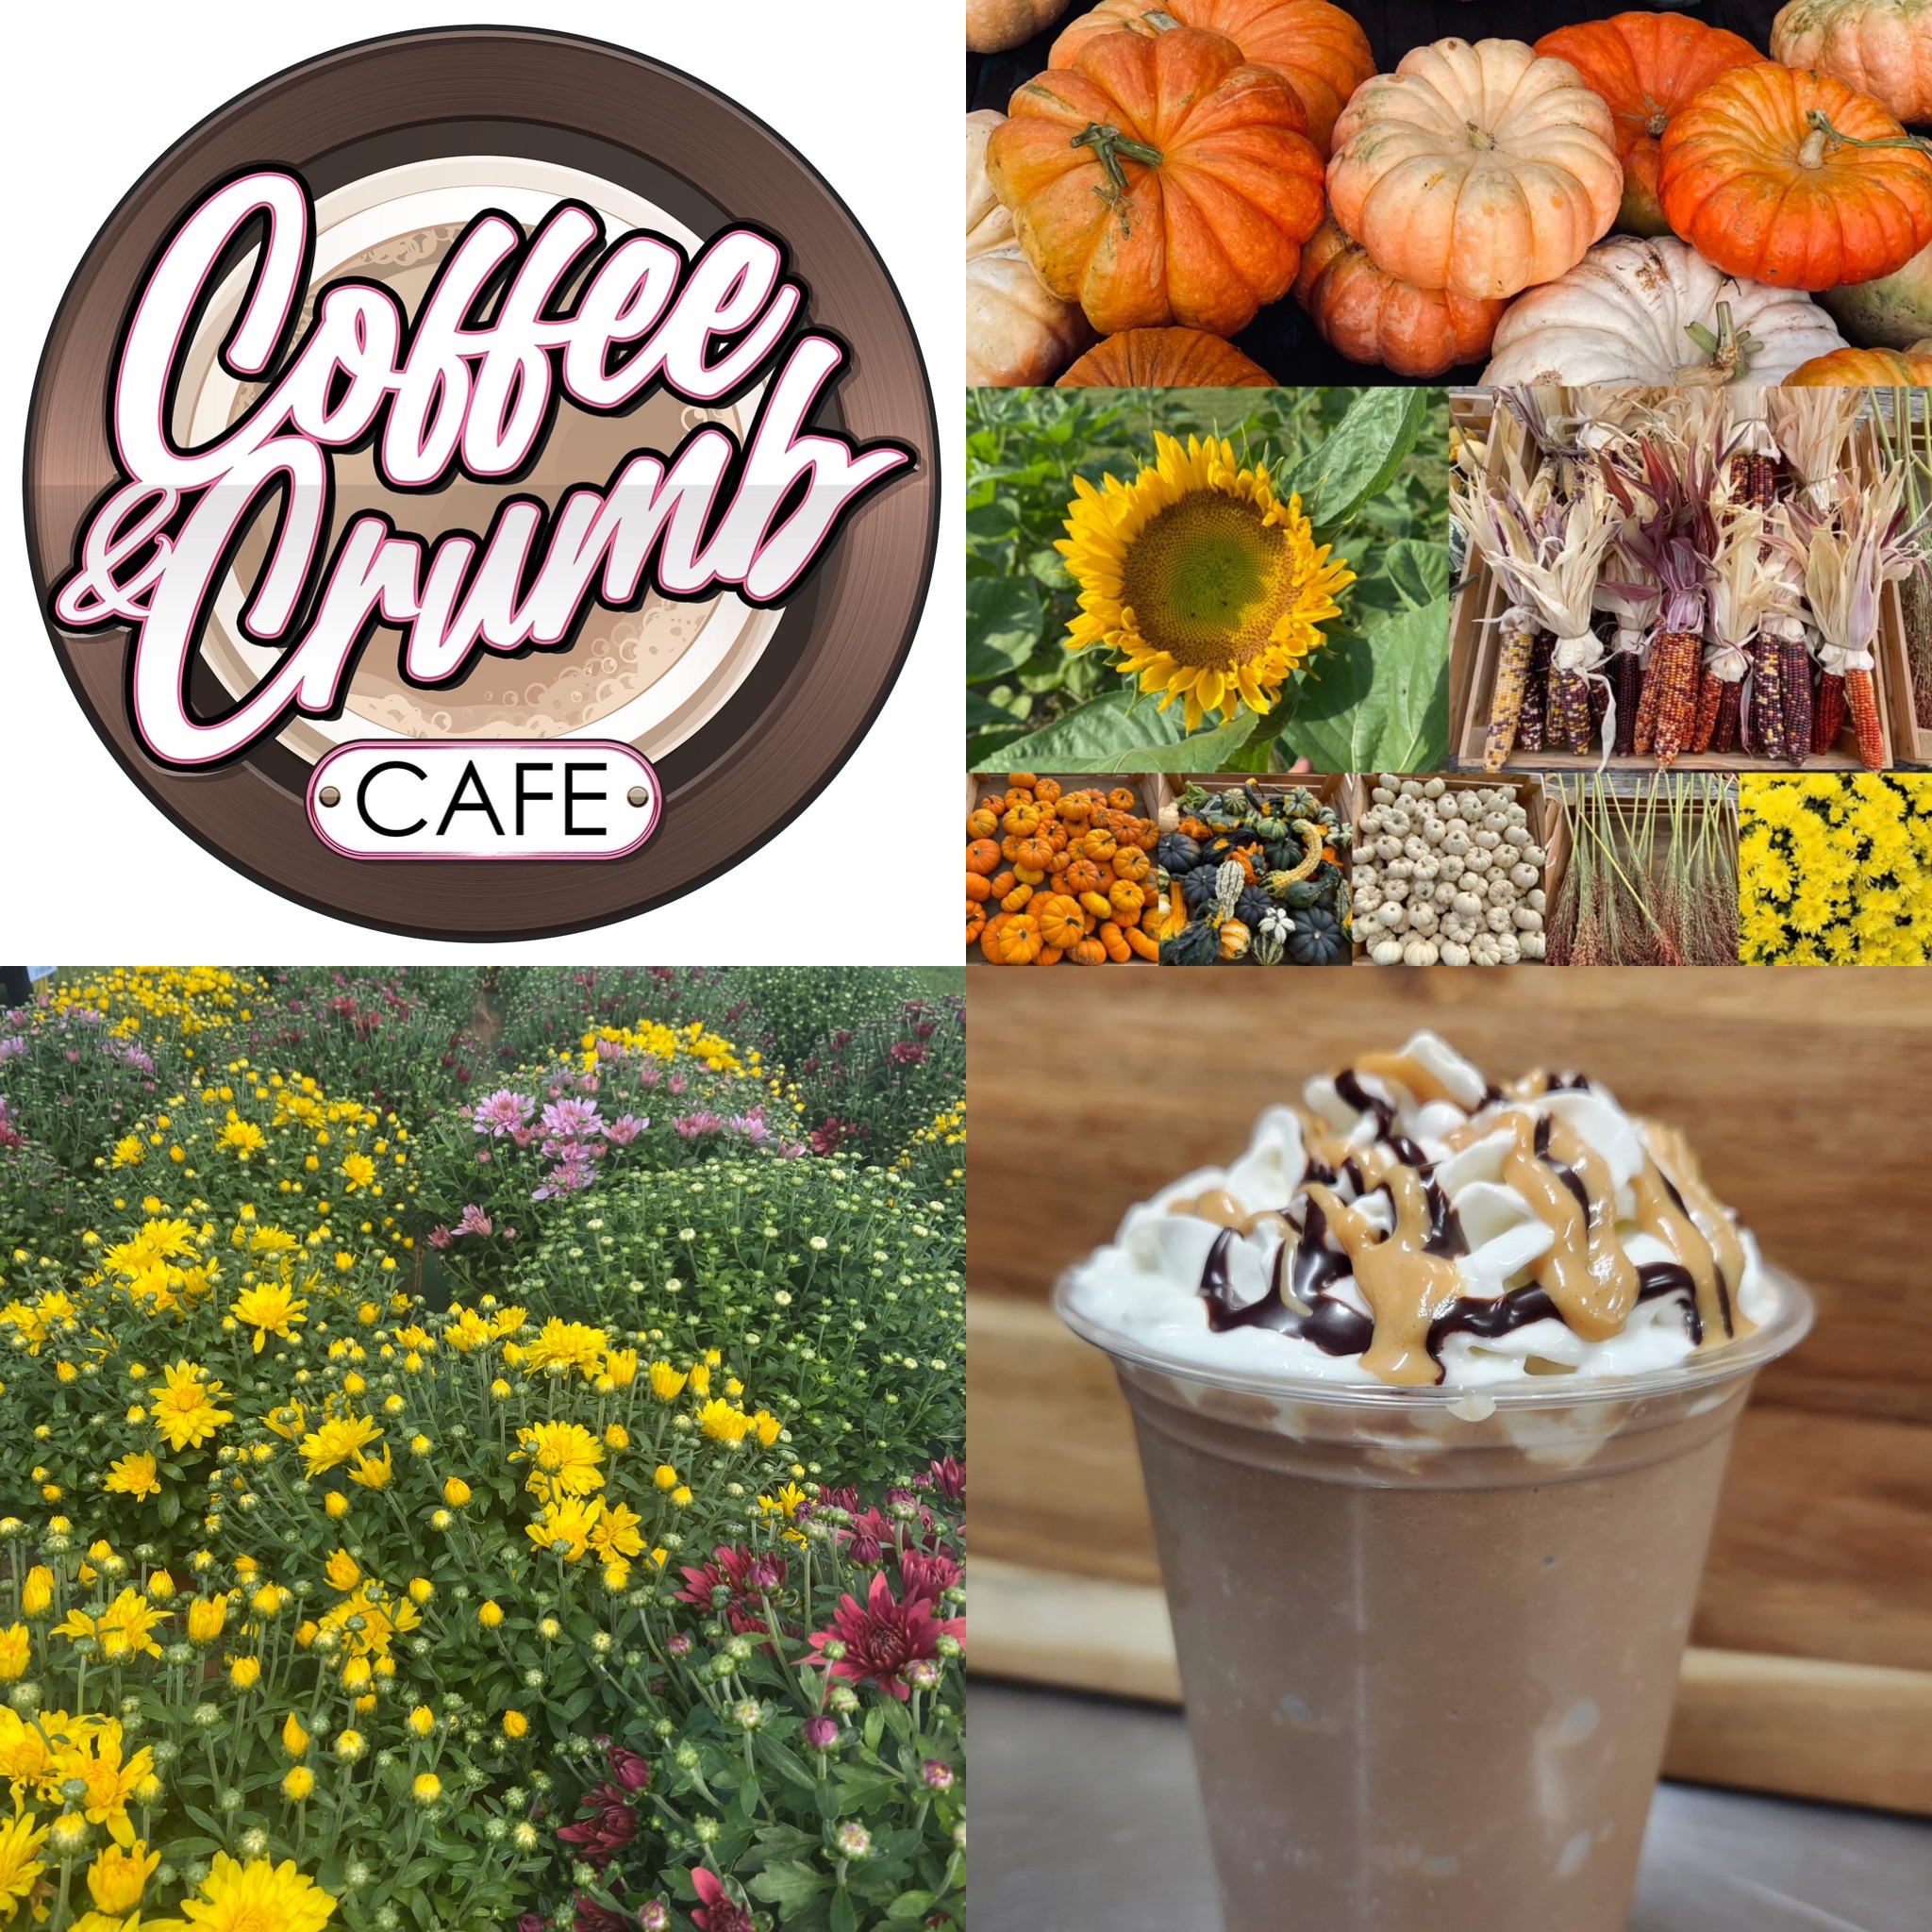 Fall decor, mums, pumpkins, and coffee drink from Coffee & Crumb Cafe